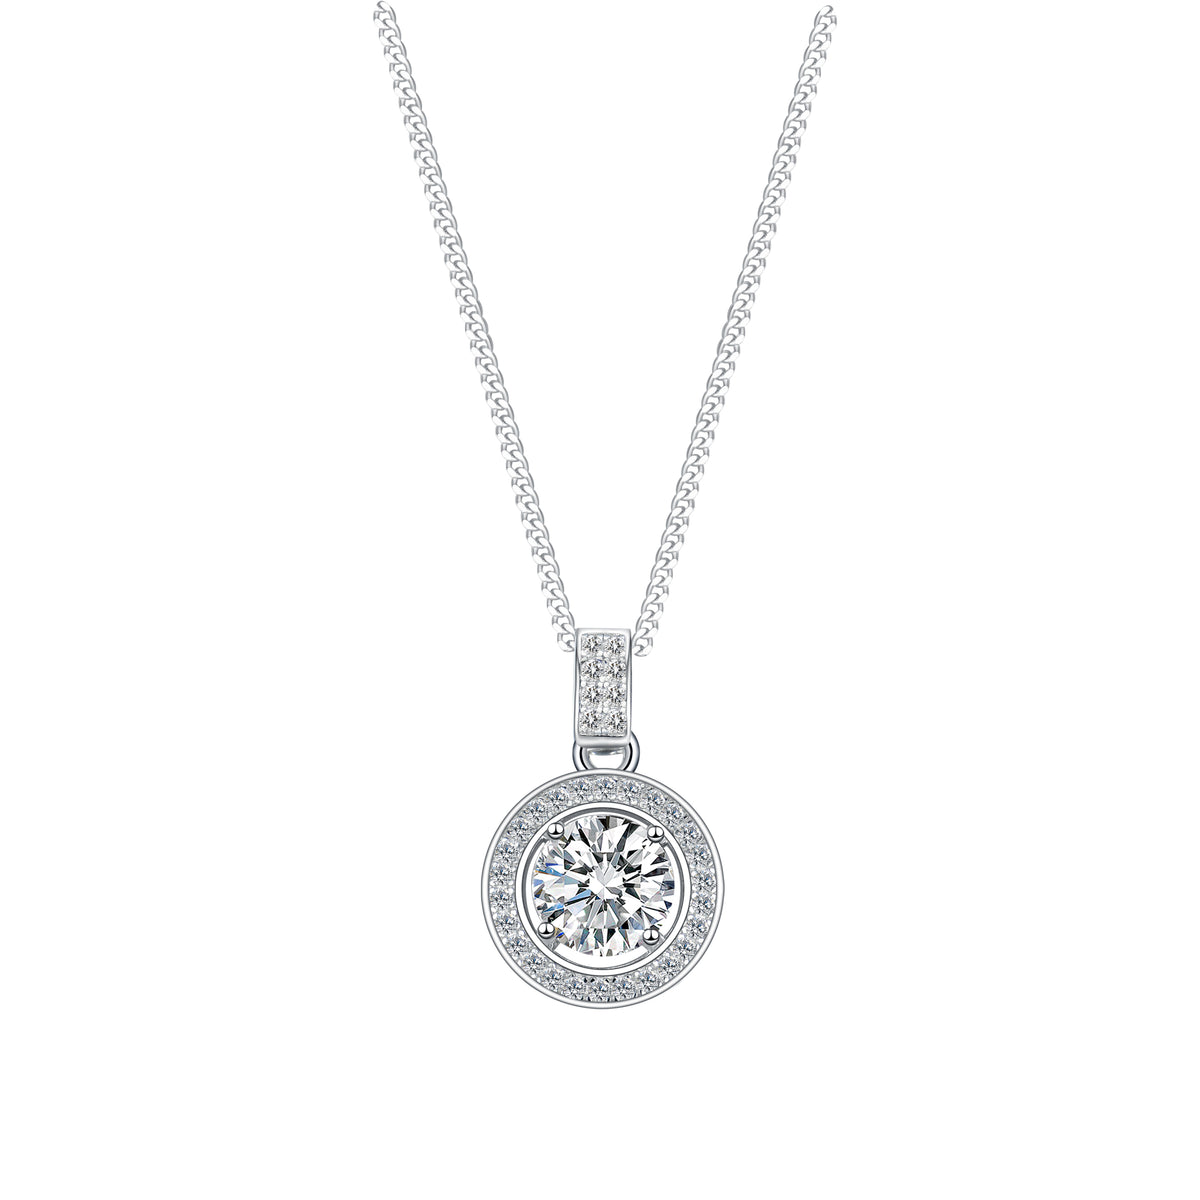 【02LIVE # link 3 】 3-5 Shipping Days A73-P2020475 S925 Sliver Moissanite Necklace 1CT